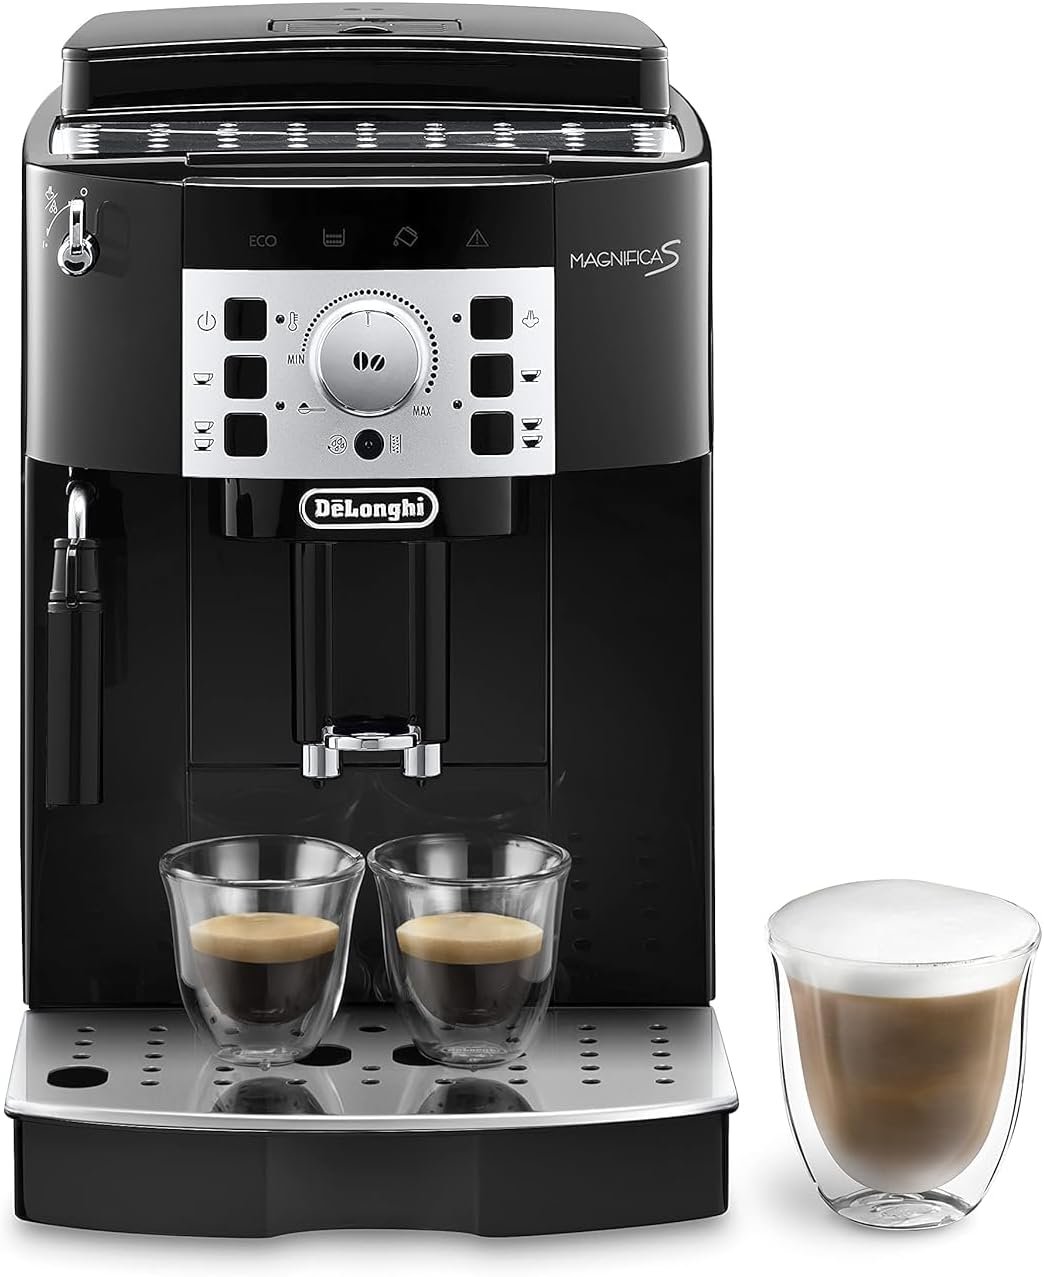 DeLonghi Magnifica S ECAM22.110.B, Coffee Maker with with Milk Frother, Automatic Espresso Machine with 2 Hot Coffee Drinks Recipes, Soft-Touch Control Panel, 1450W, Black